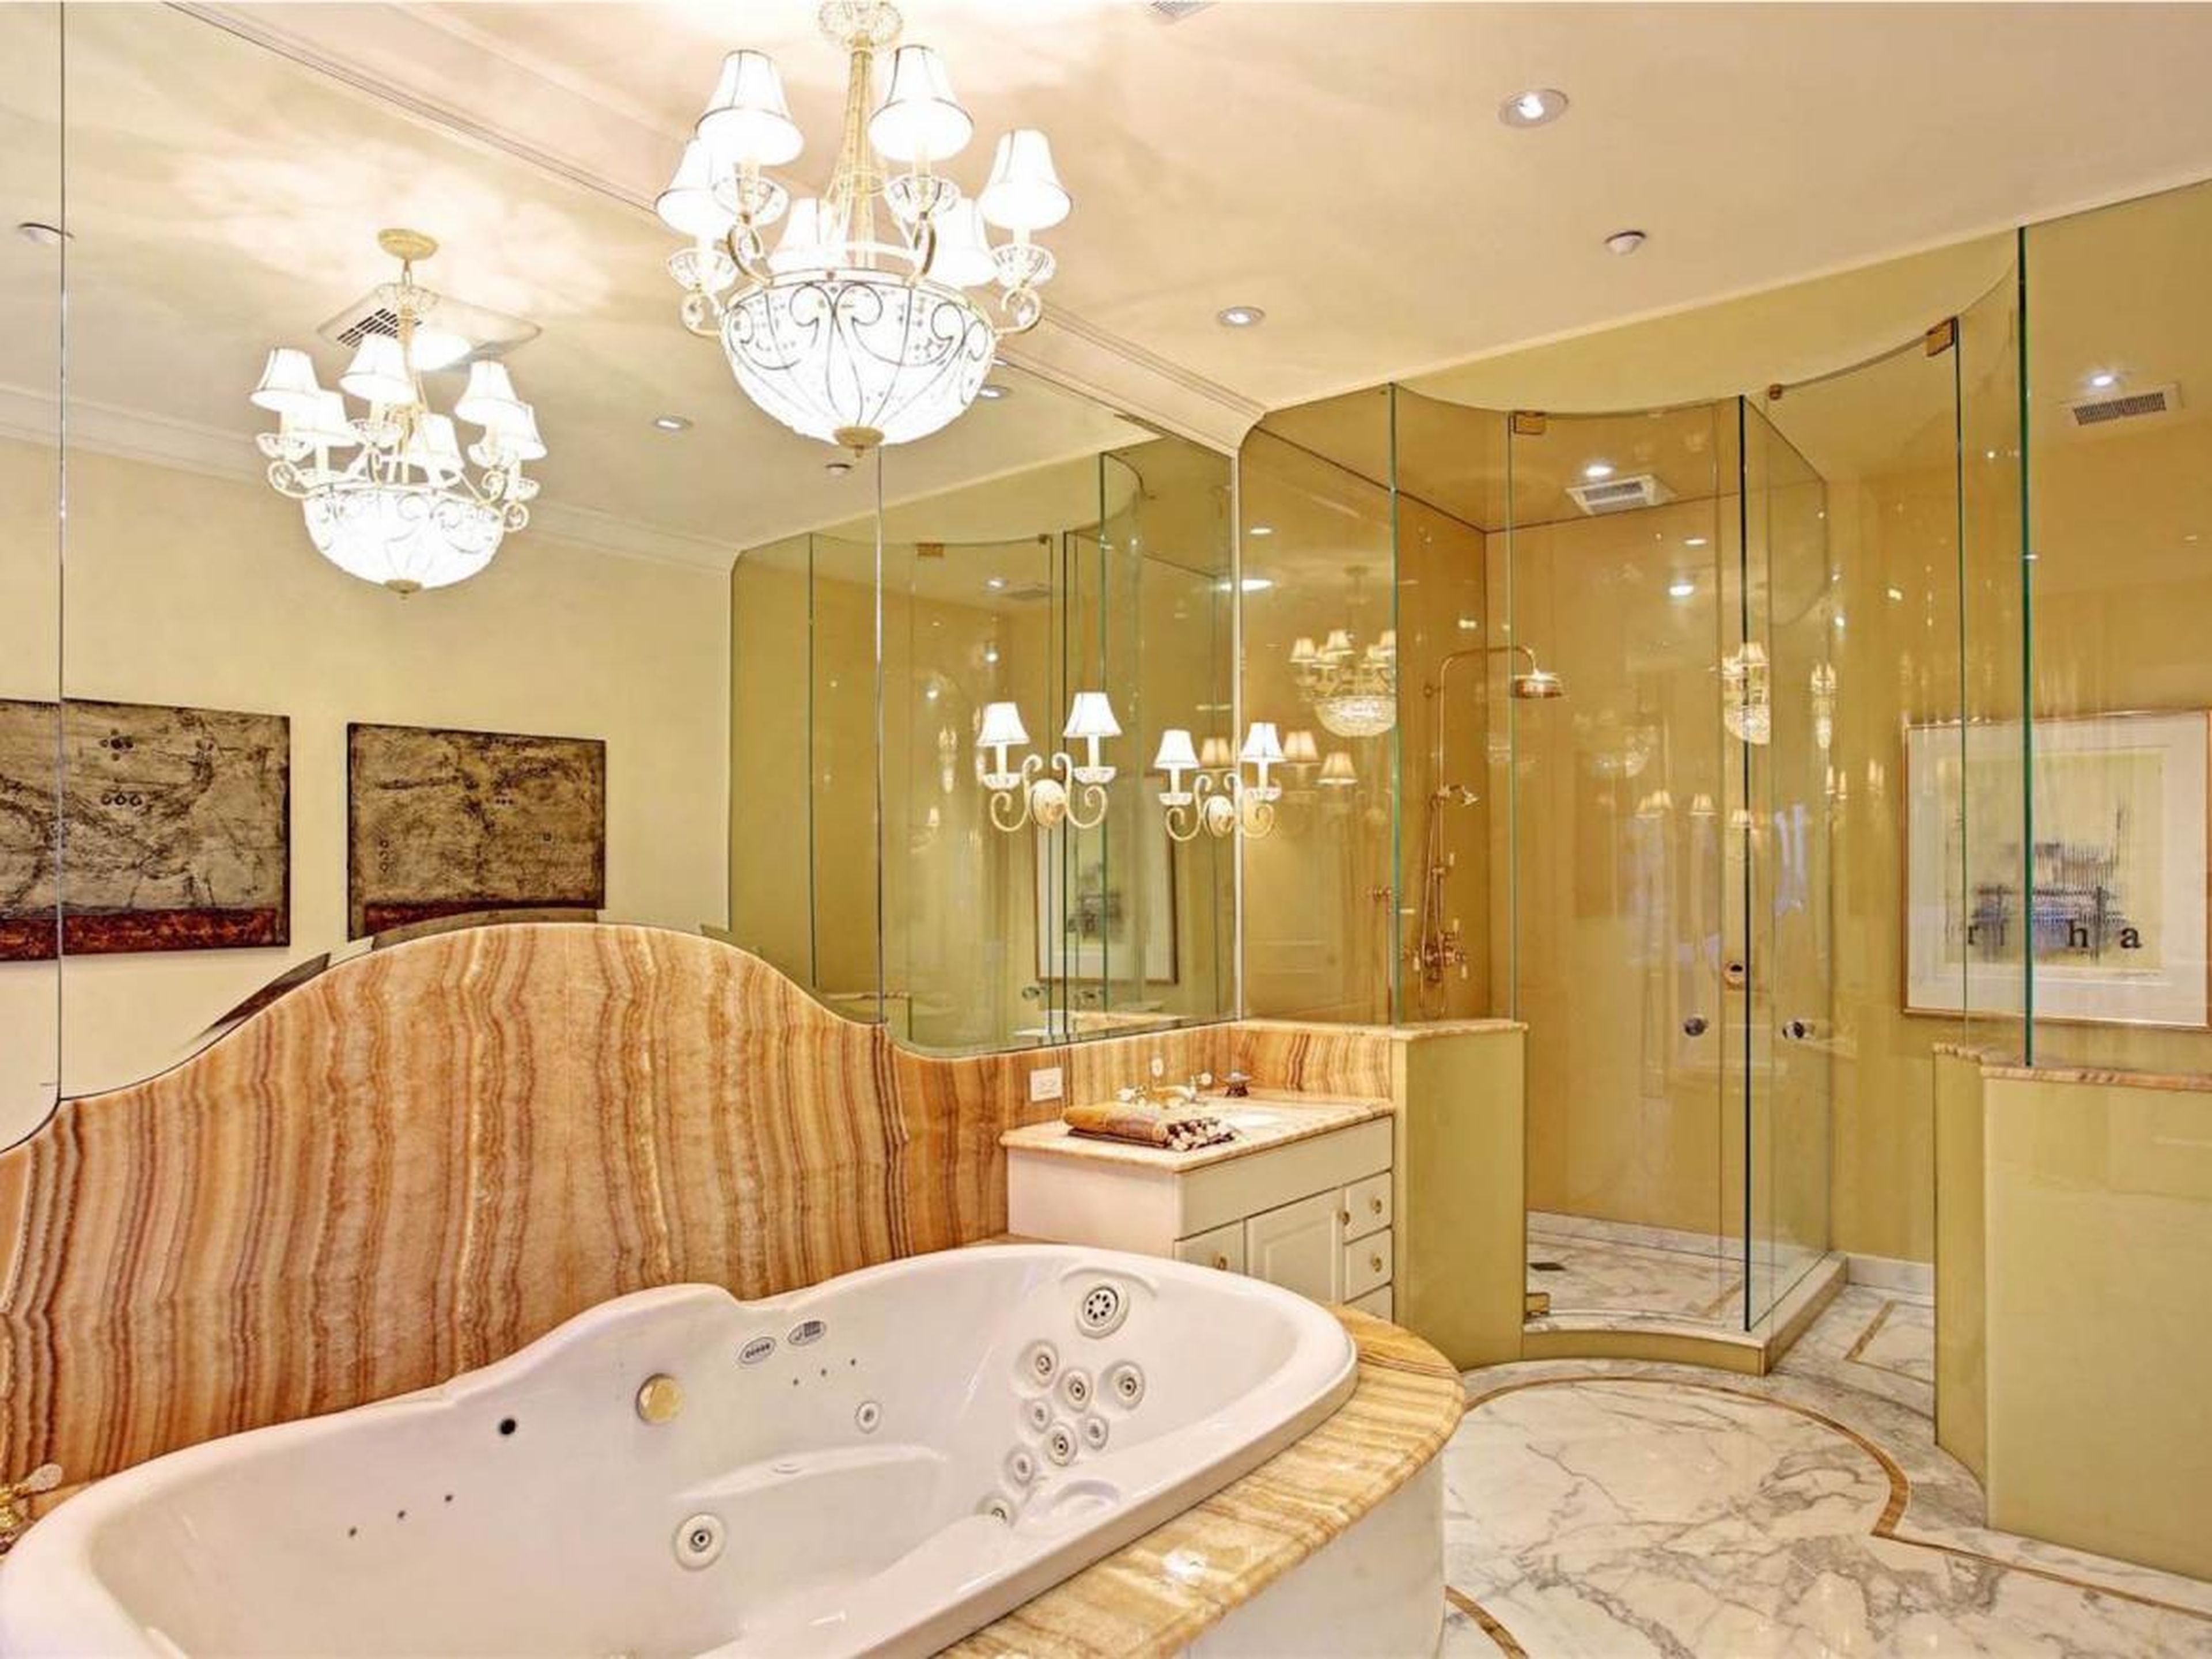 There are eight full bathrooms and three half-baths. Many feature granite flooring, marble countertops, a shower, a tub, and a crystal chandelier that dresses up a room.